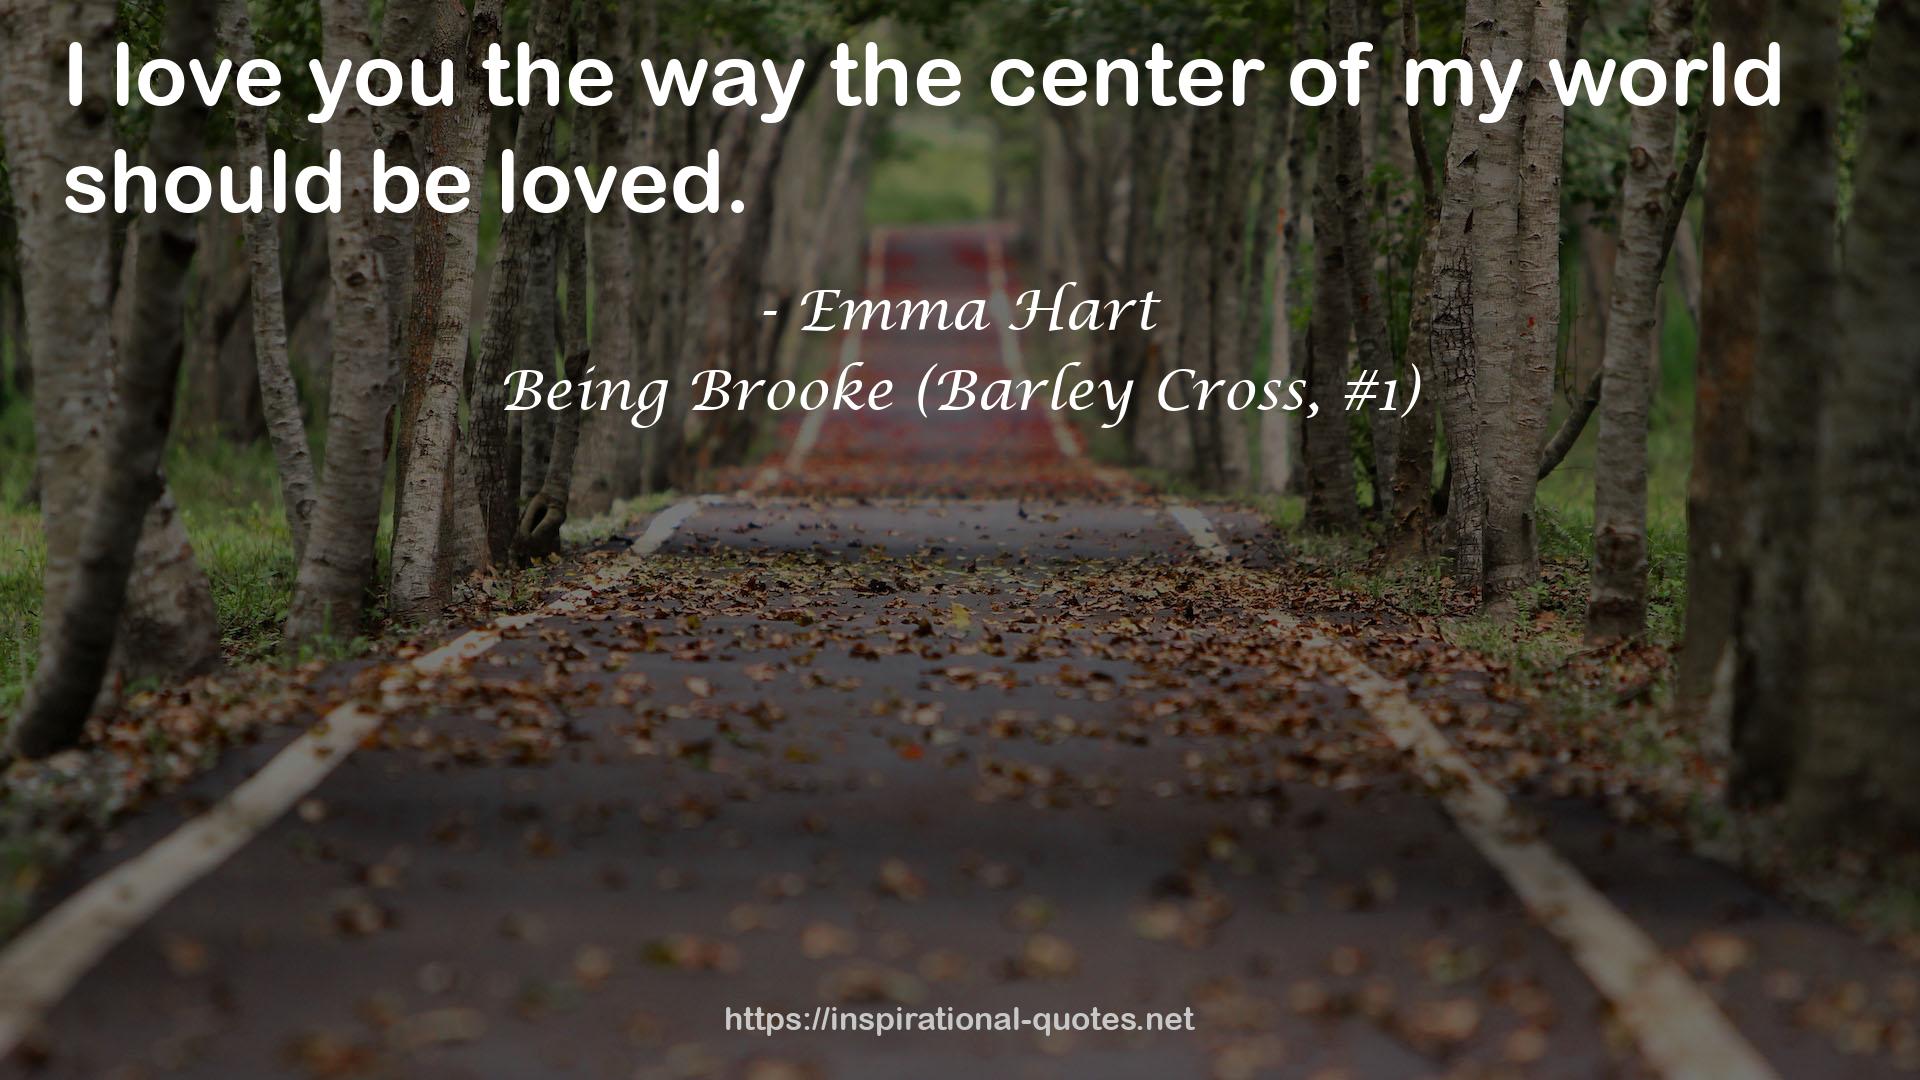 Being Brooke (Barley Cross, #1) QUOTES